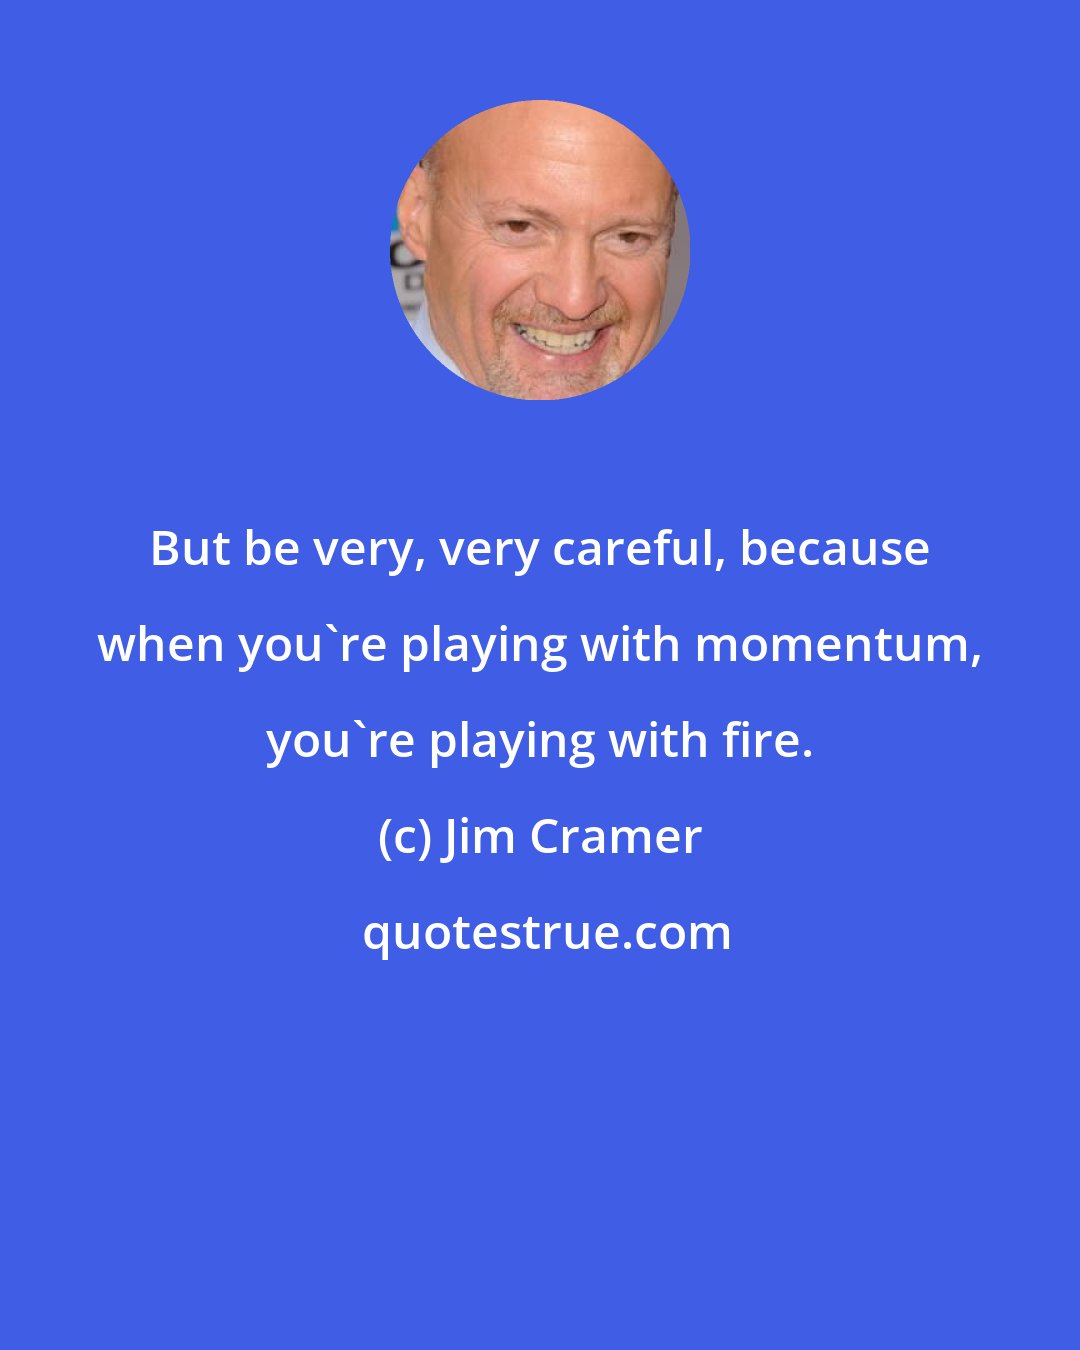 Jim Cramer: But be very, very careful, because when you're playing with momentum, you're playing with fire.